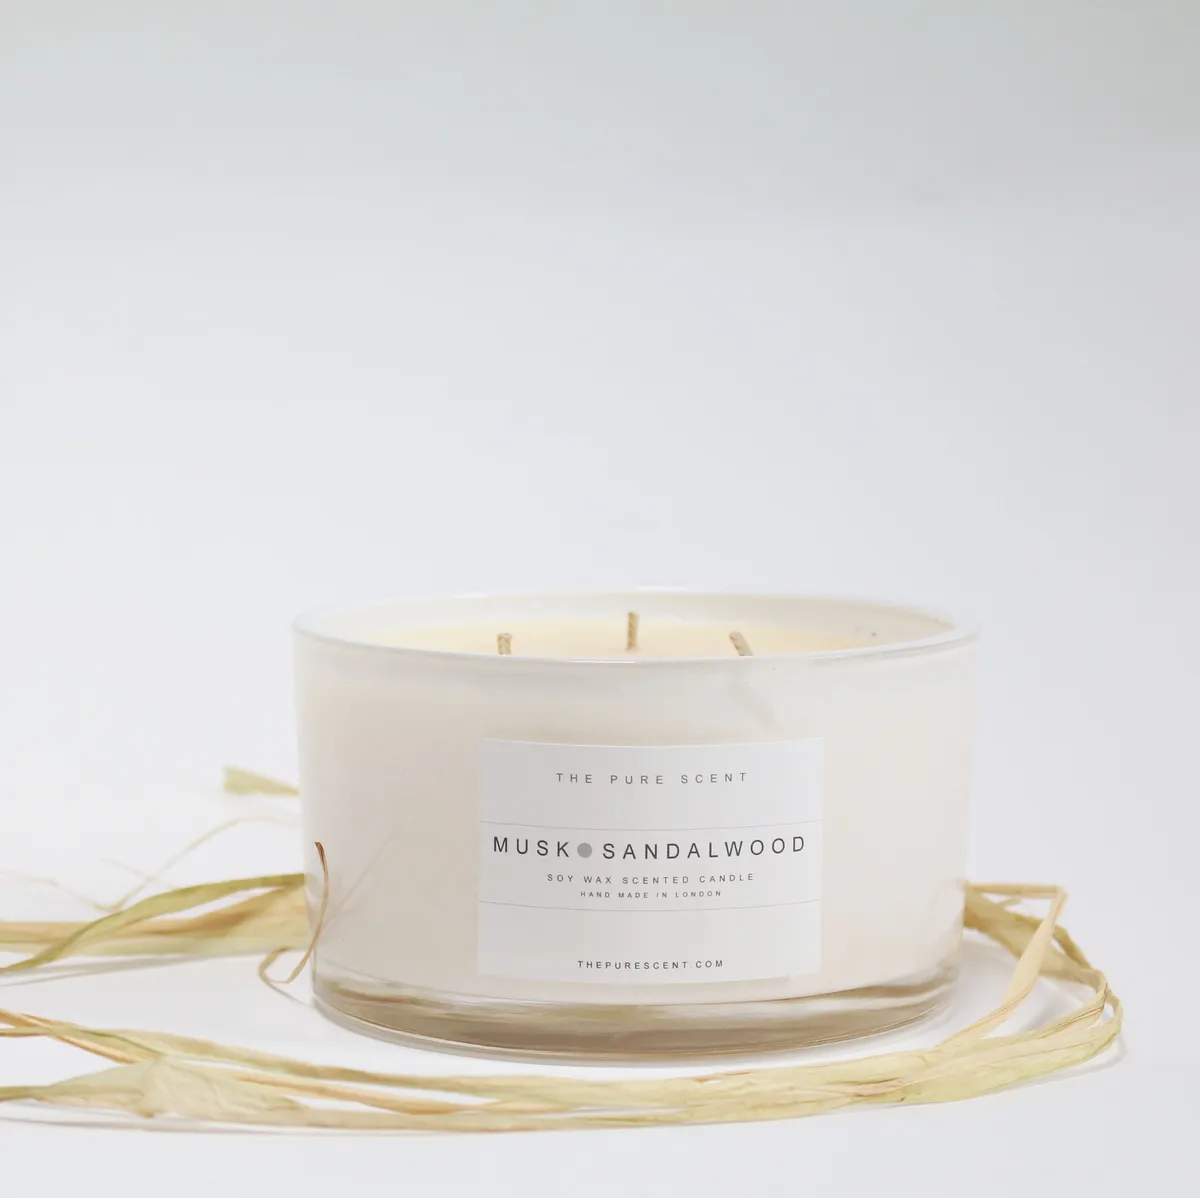 This soy wax candle combines Scandi simplicity with a delicious scent. Scented 3-wick candle in a glass, £32.50, Know